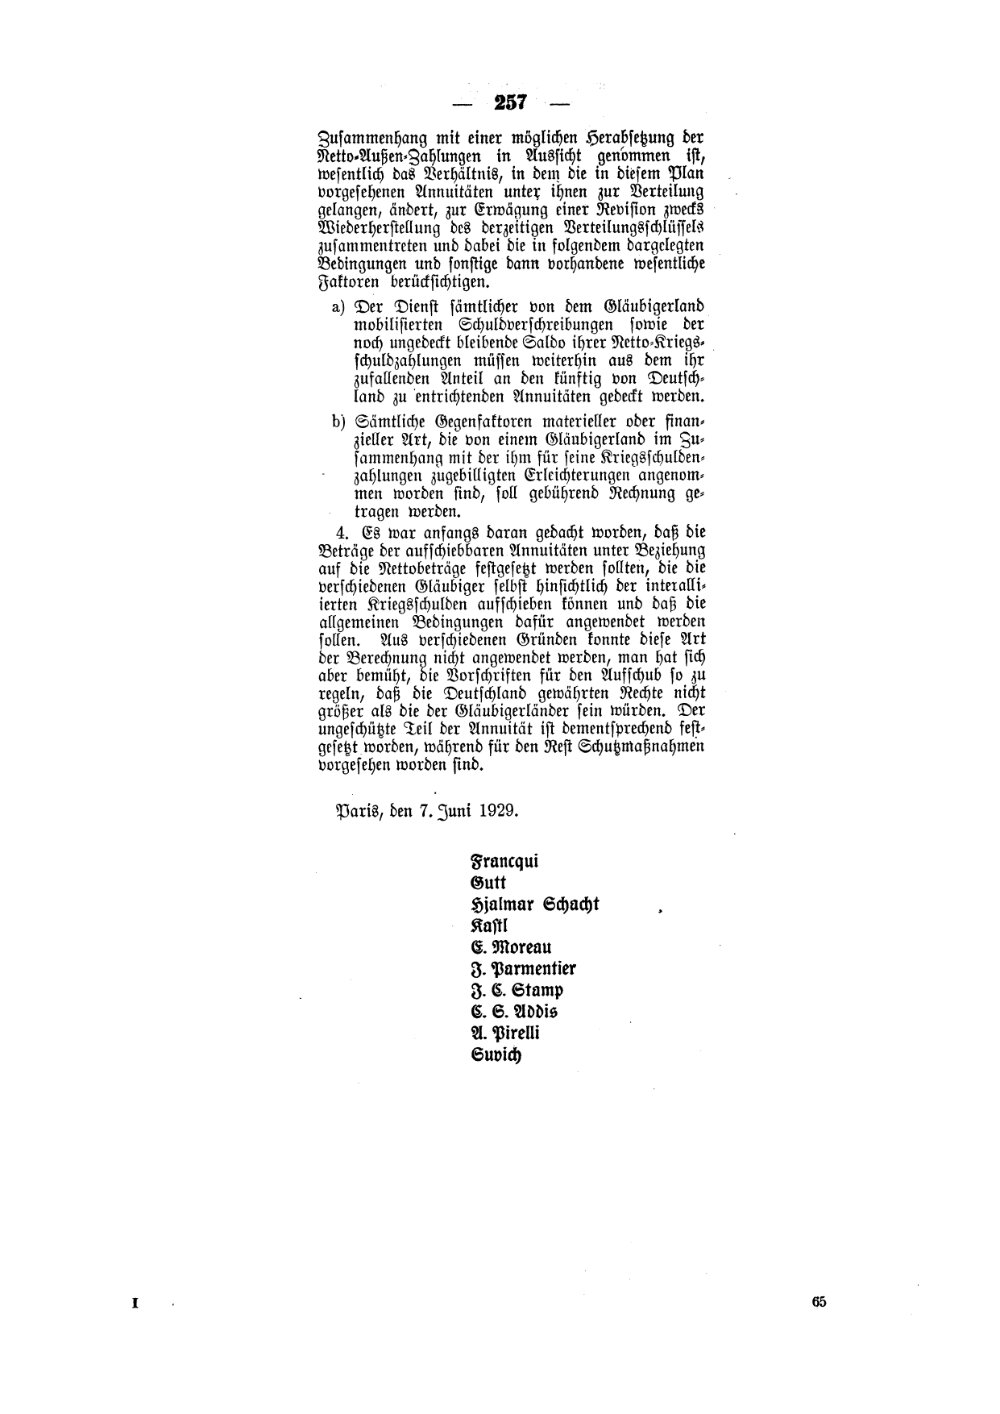 Scan of page 257